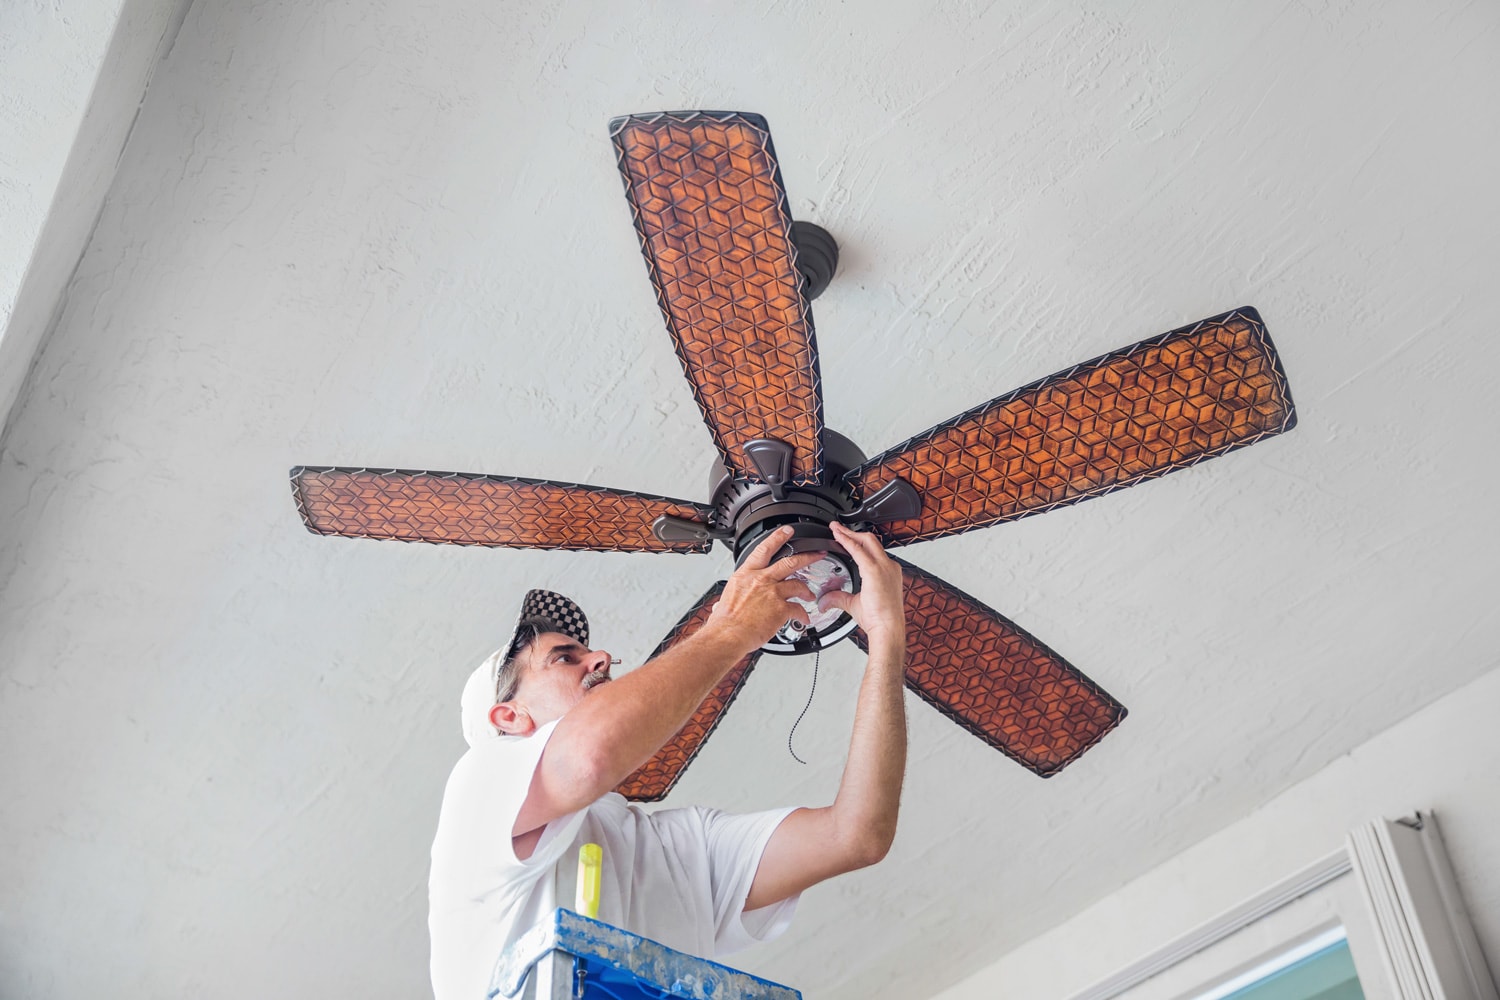 A real electrician stands on a ladder while finishing hanging a ceiling fan